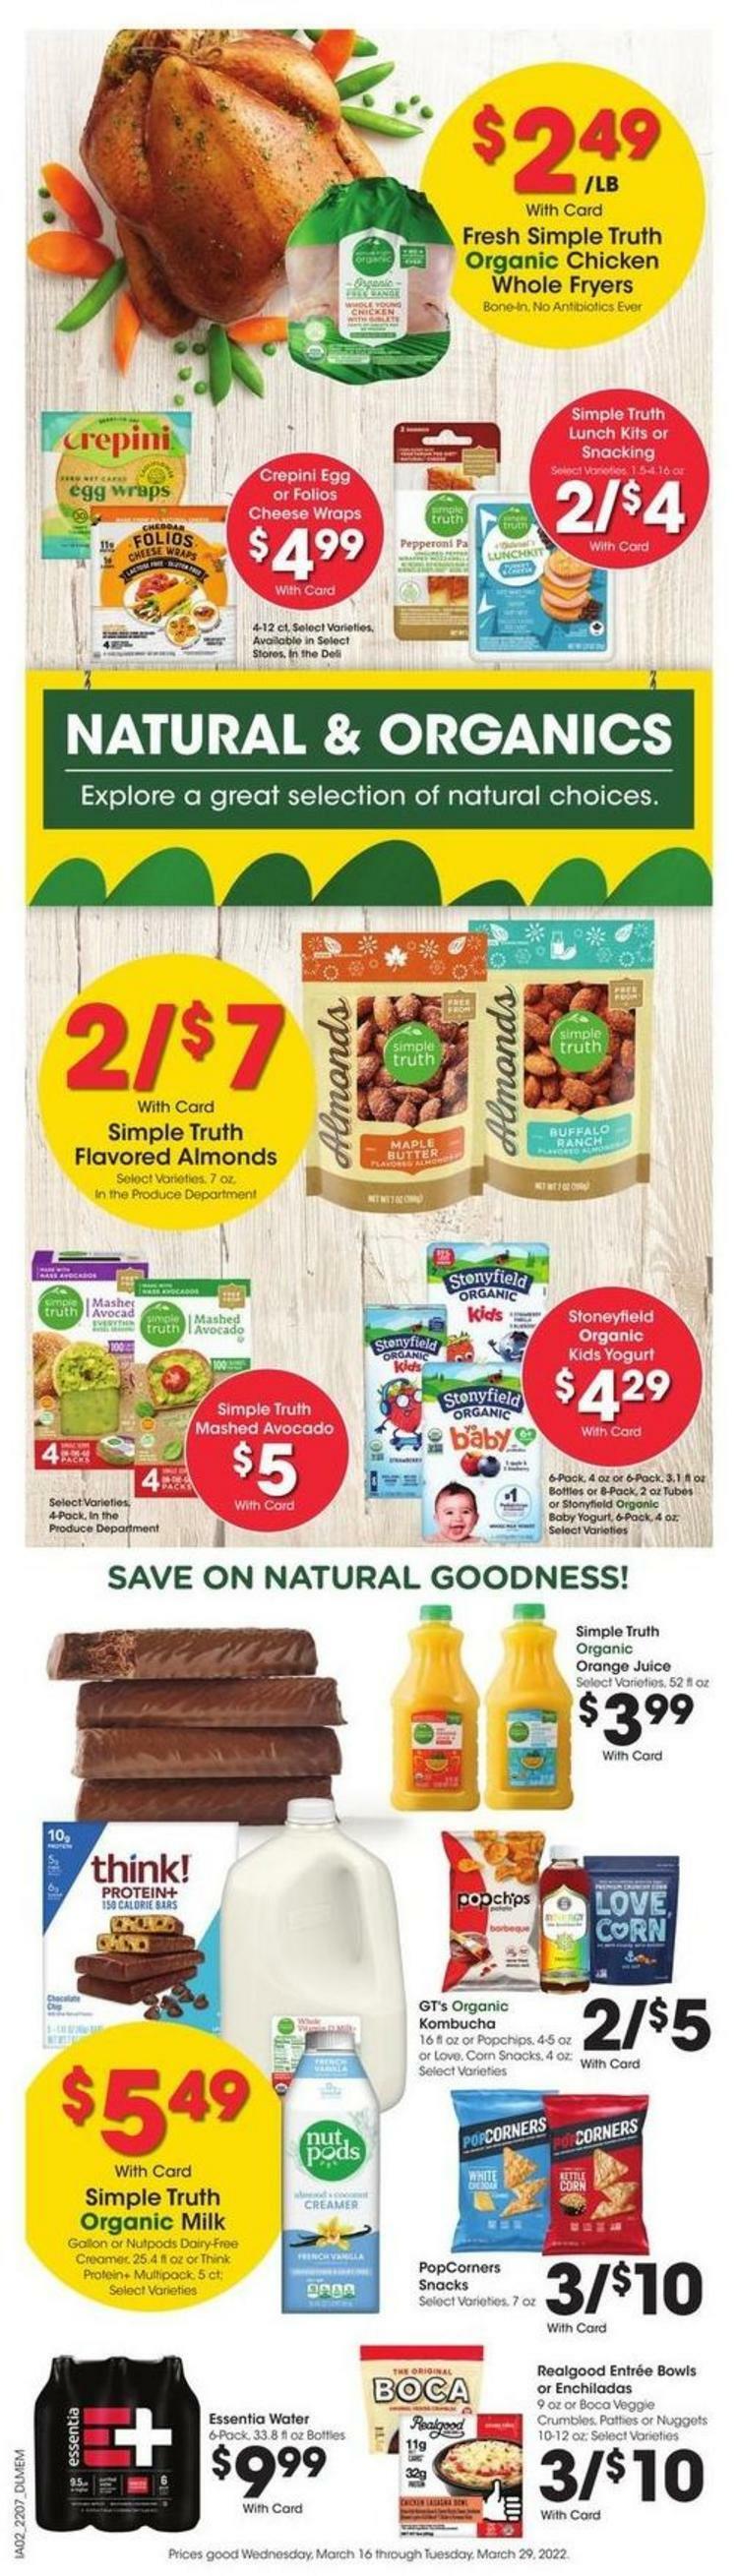 Kroger Weekly Ad from March 23